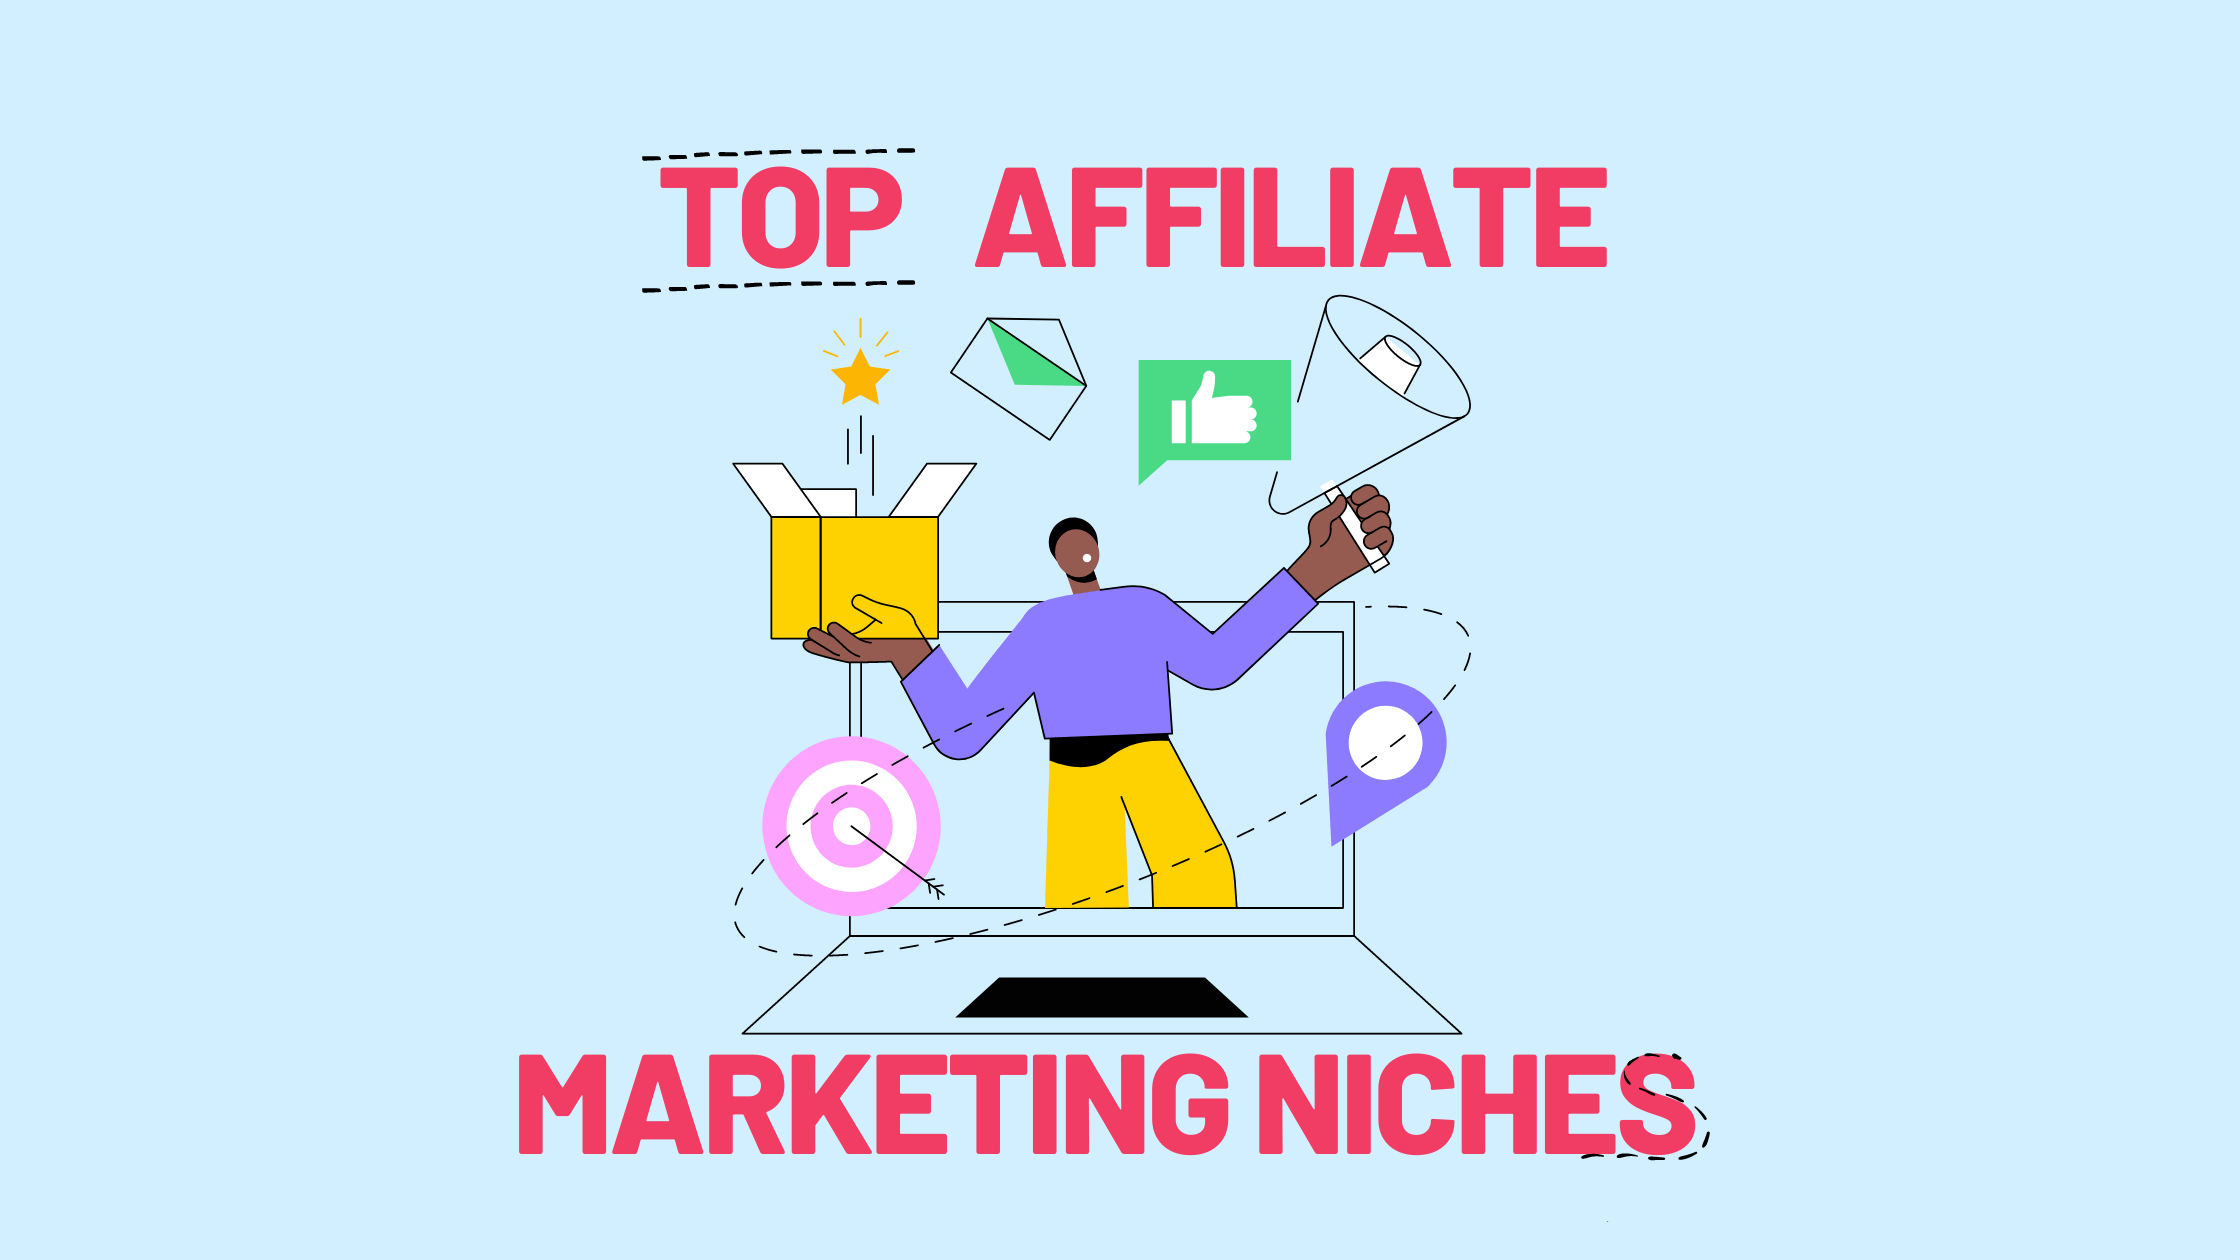 Top affiliate marketing niches blog title picture